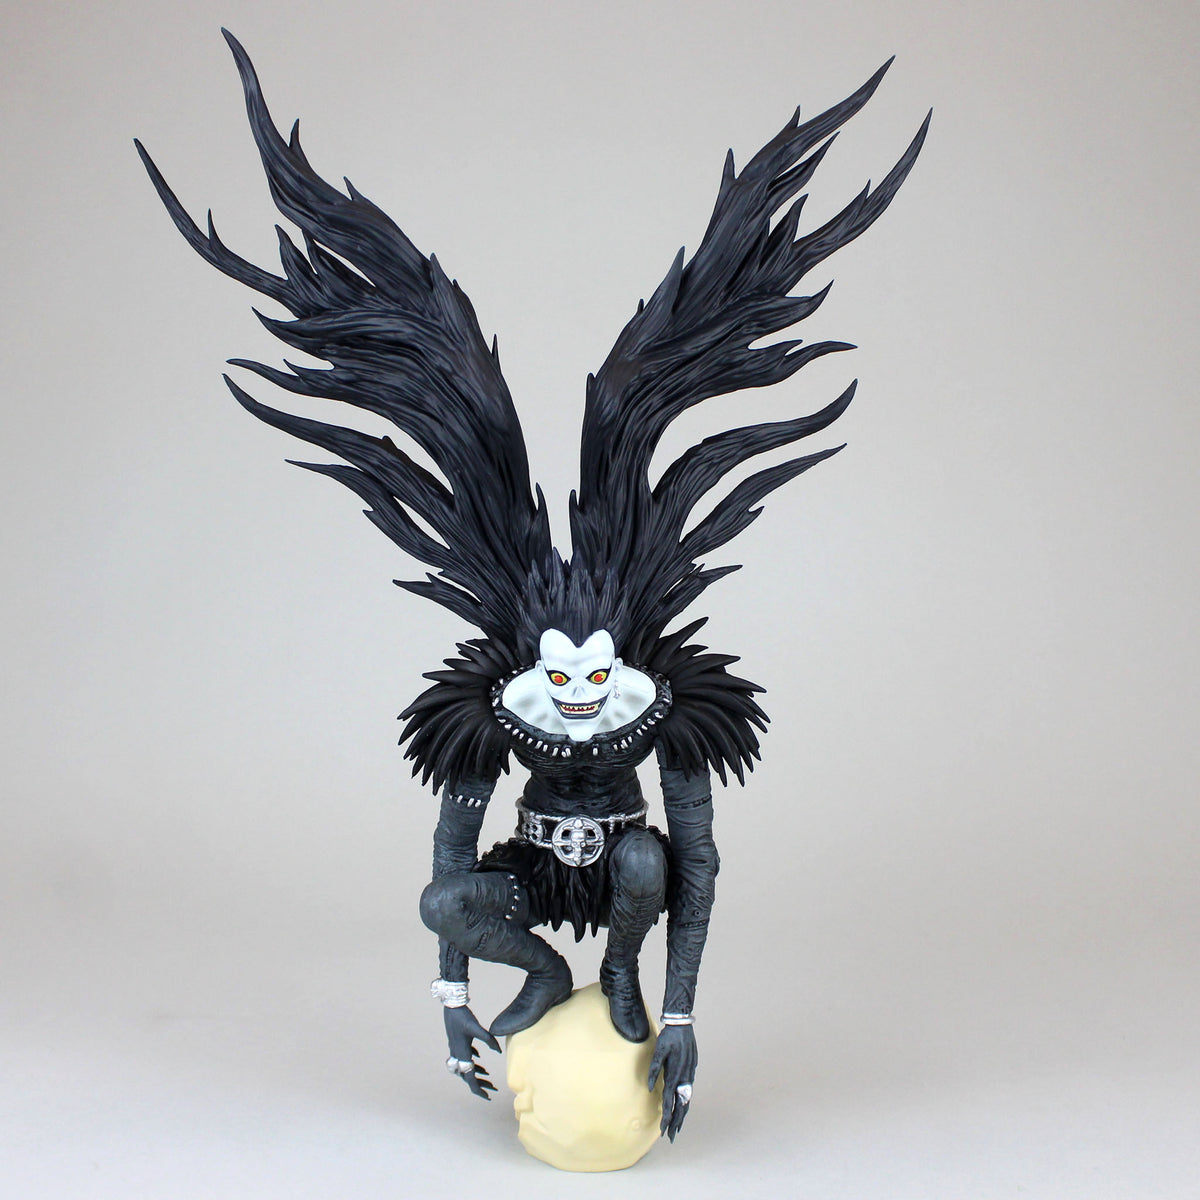 DEATH NOTE Ryuk Figurine from House of Spells